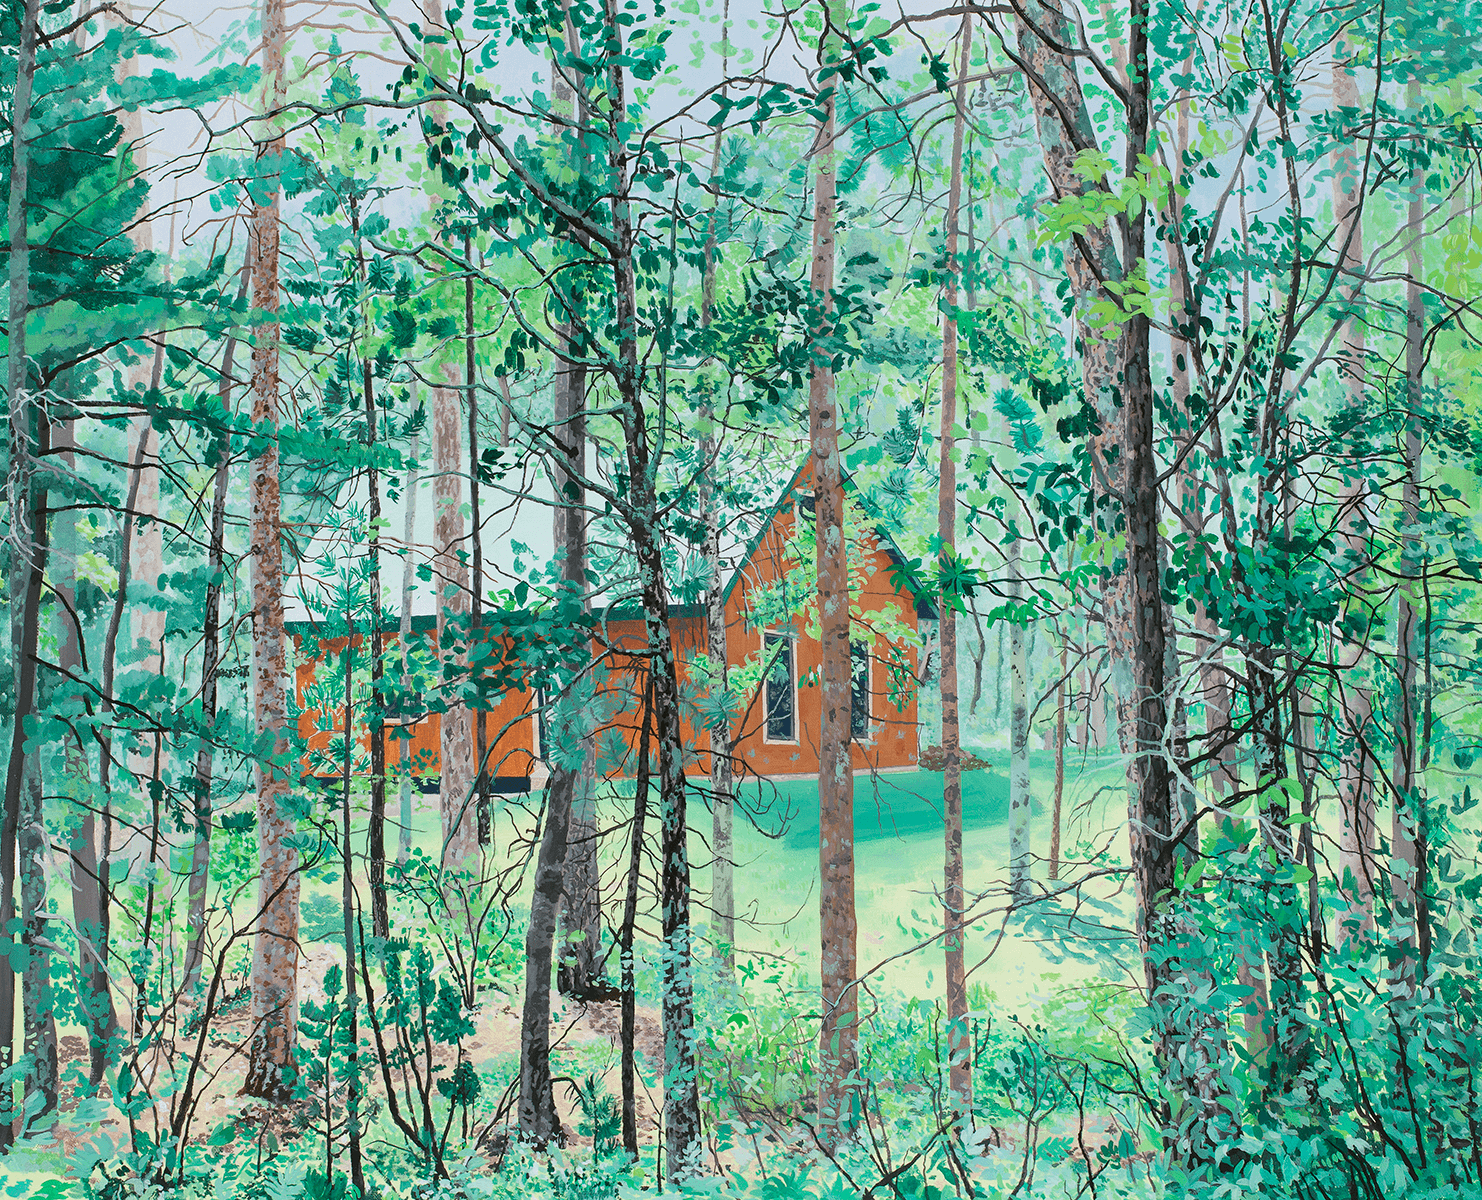 Scout Lake Cabin, 2011, oil on canvas, 26 x 32 inches